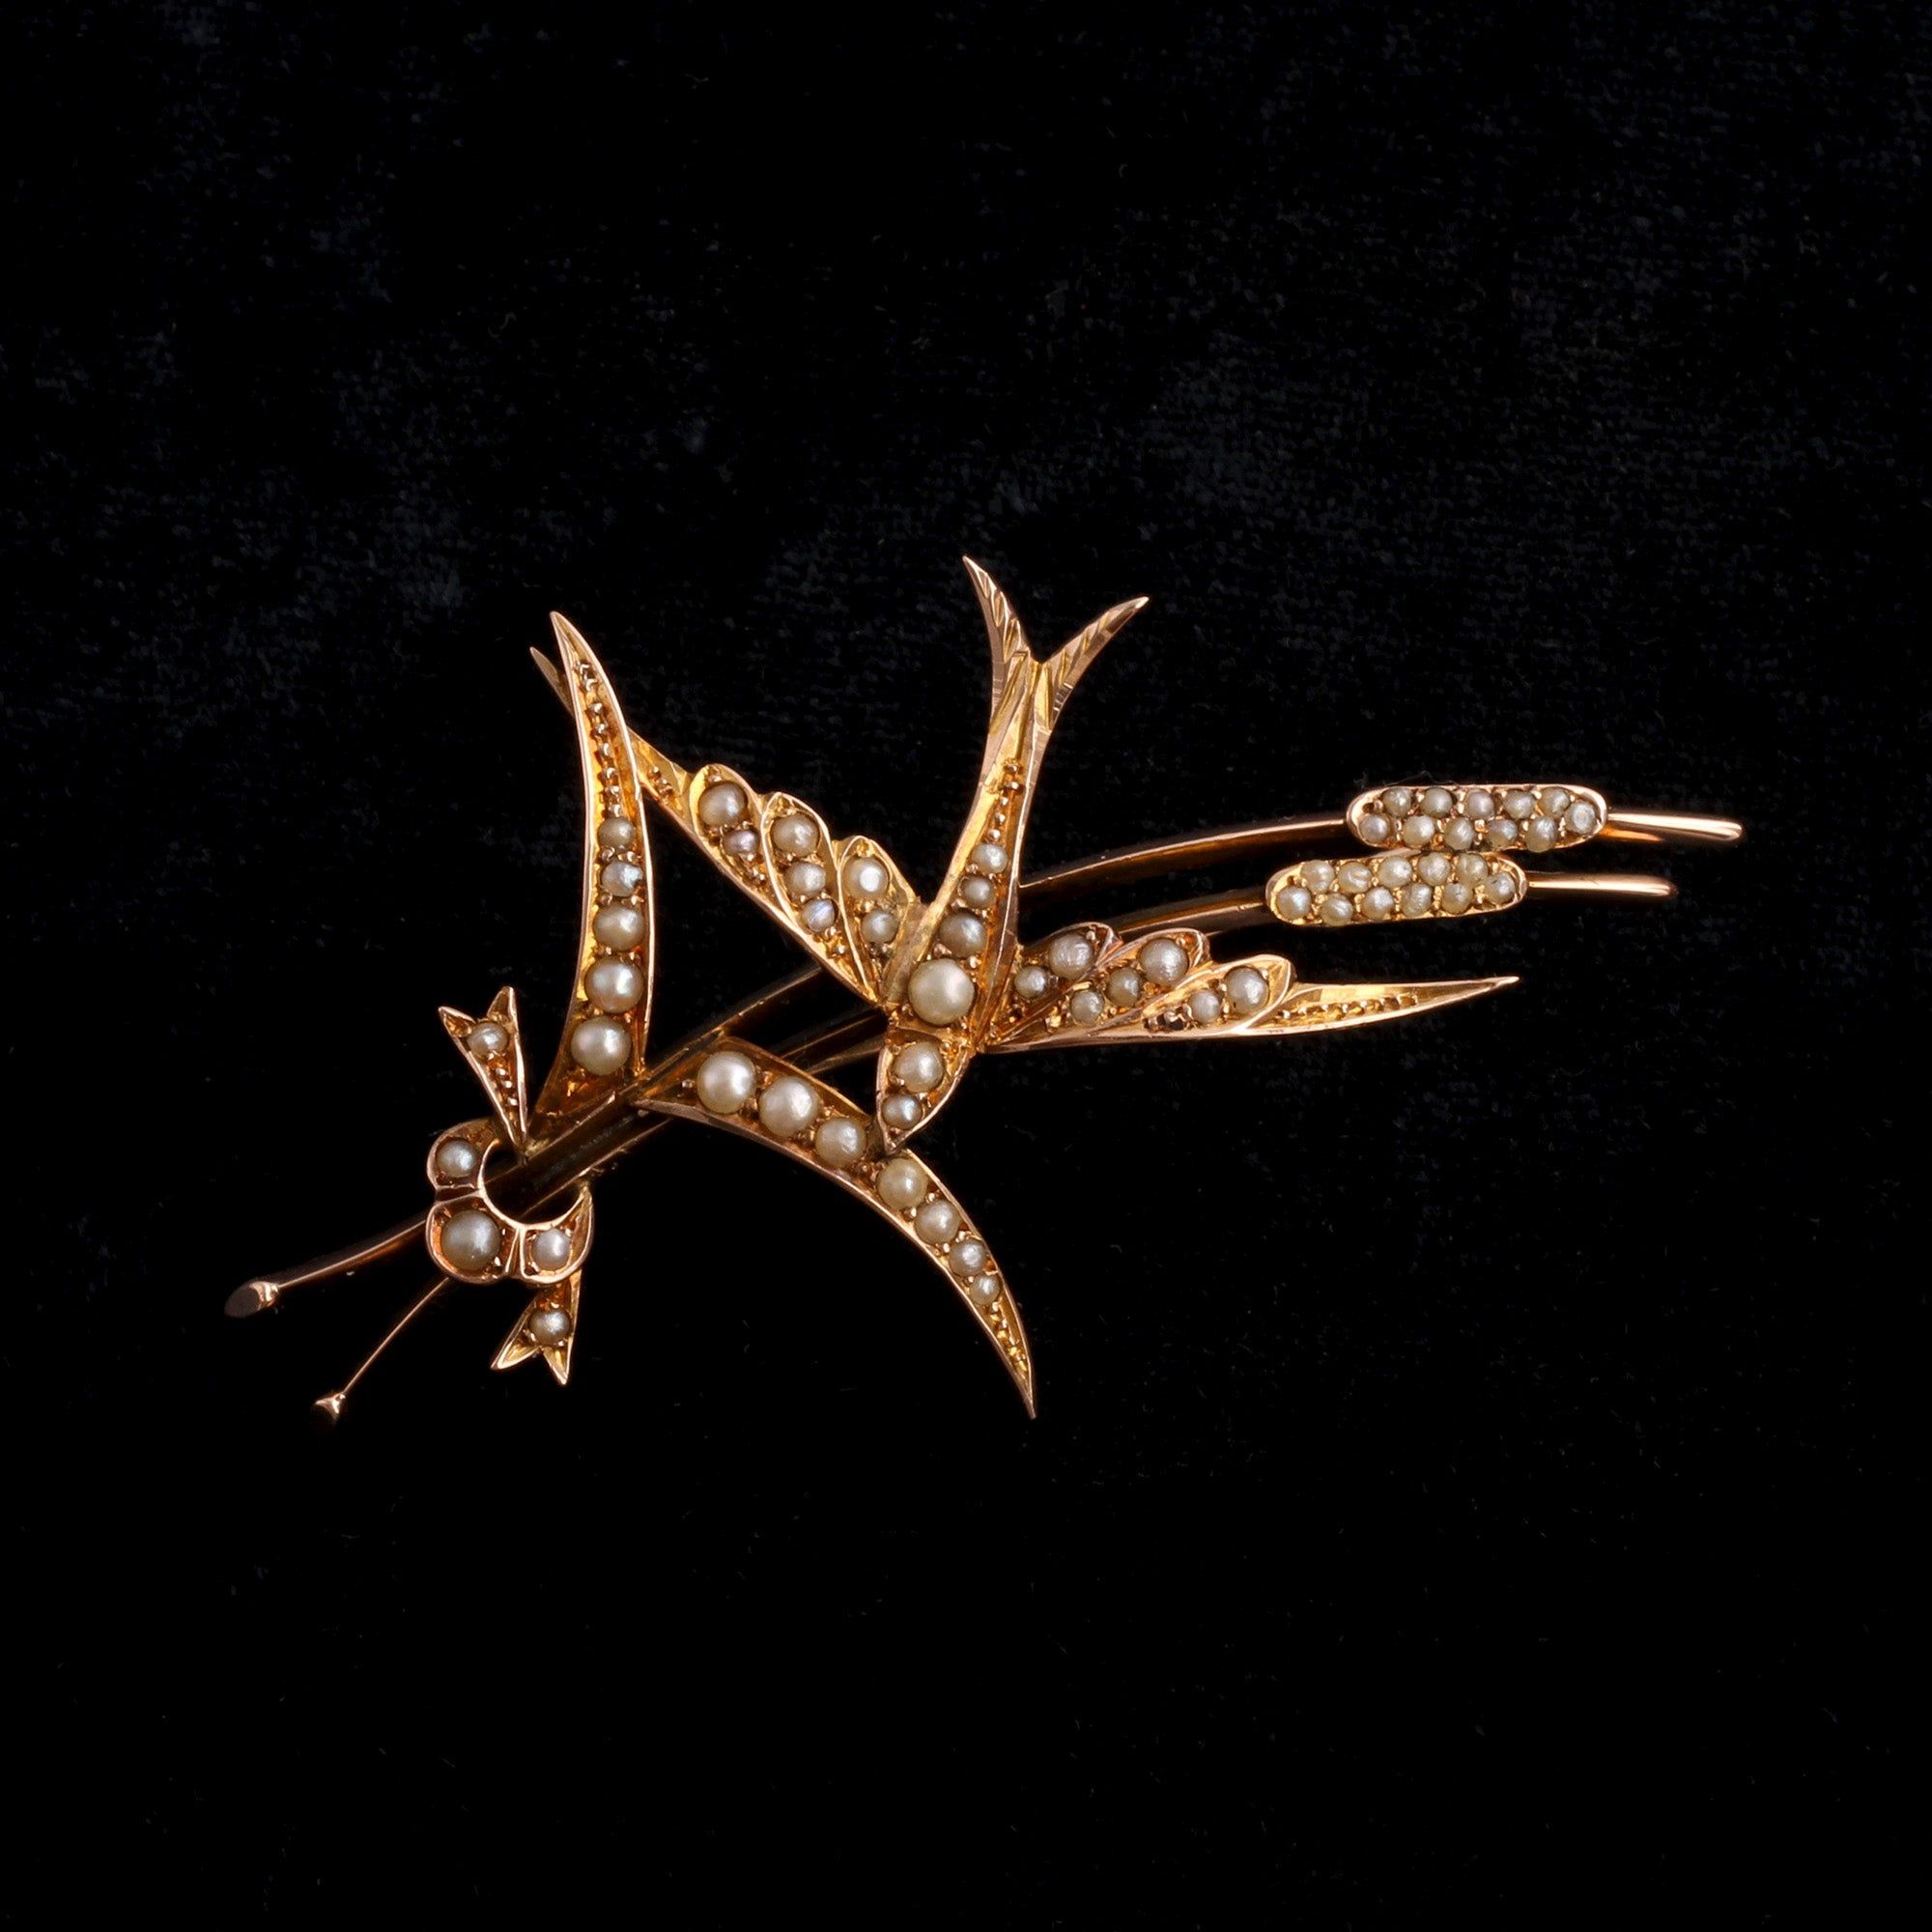 Victorian Swallow and Bullrush Brooch